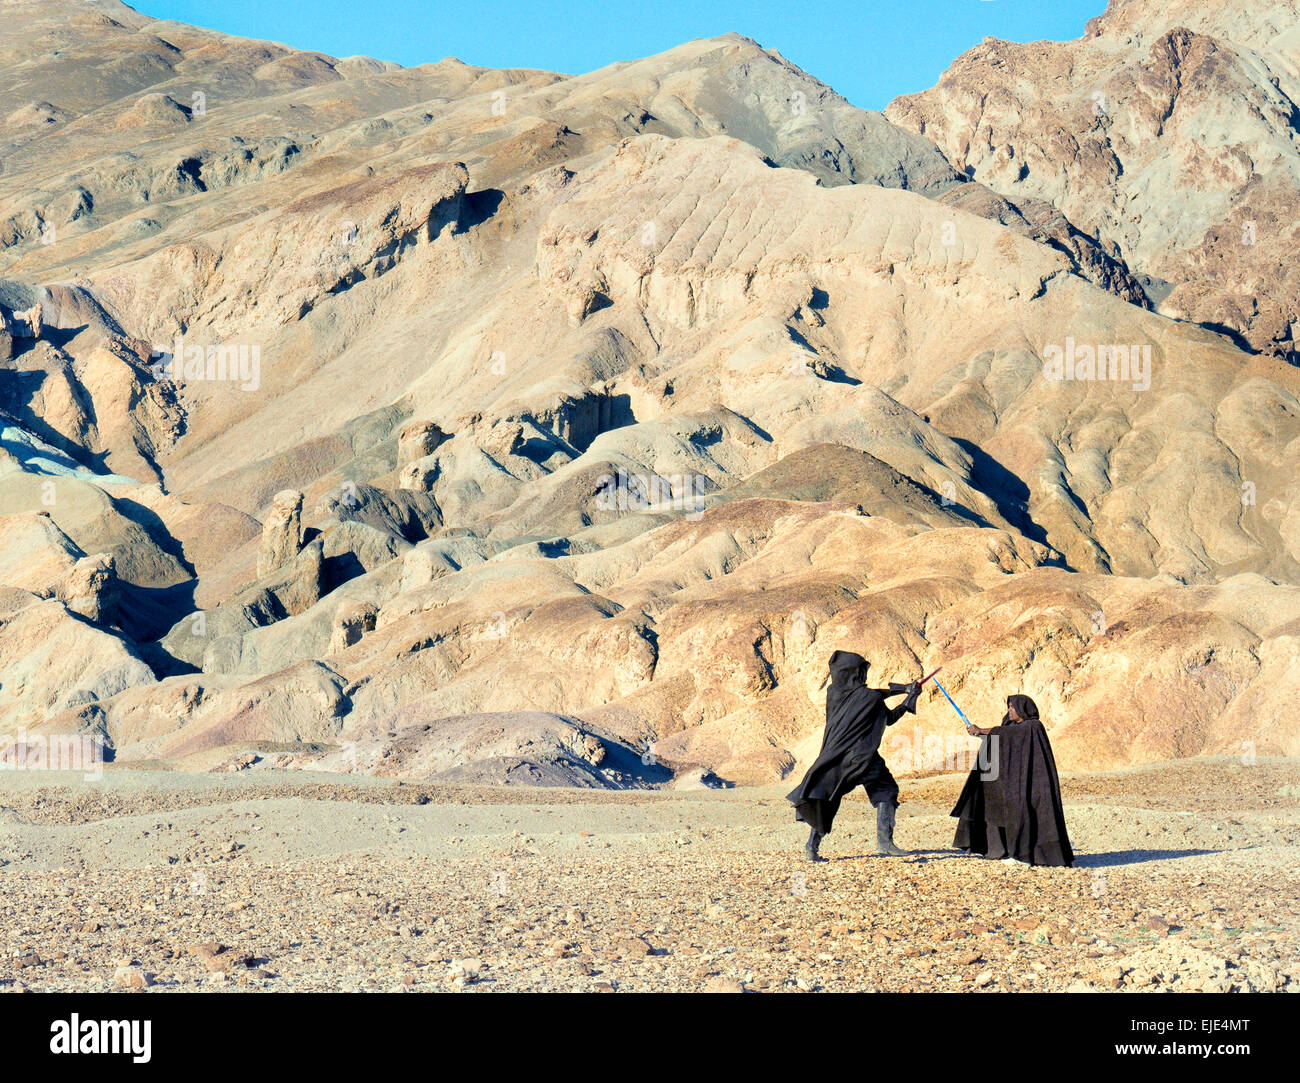 Two en-actors recreate a scene from a 'Star Wars' movie. Stock Photo